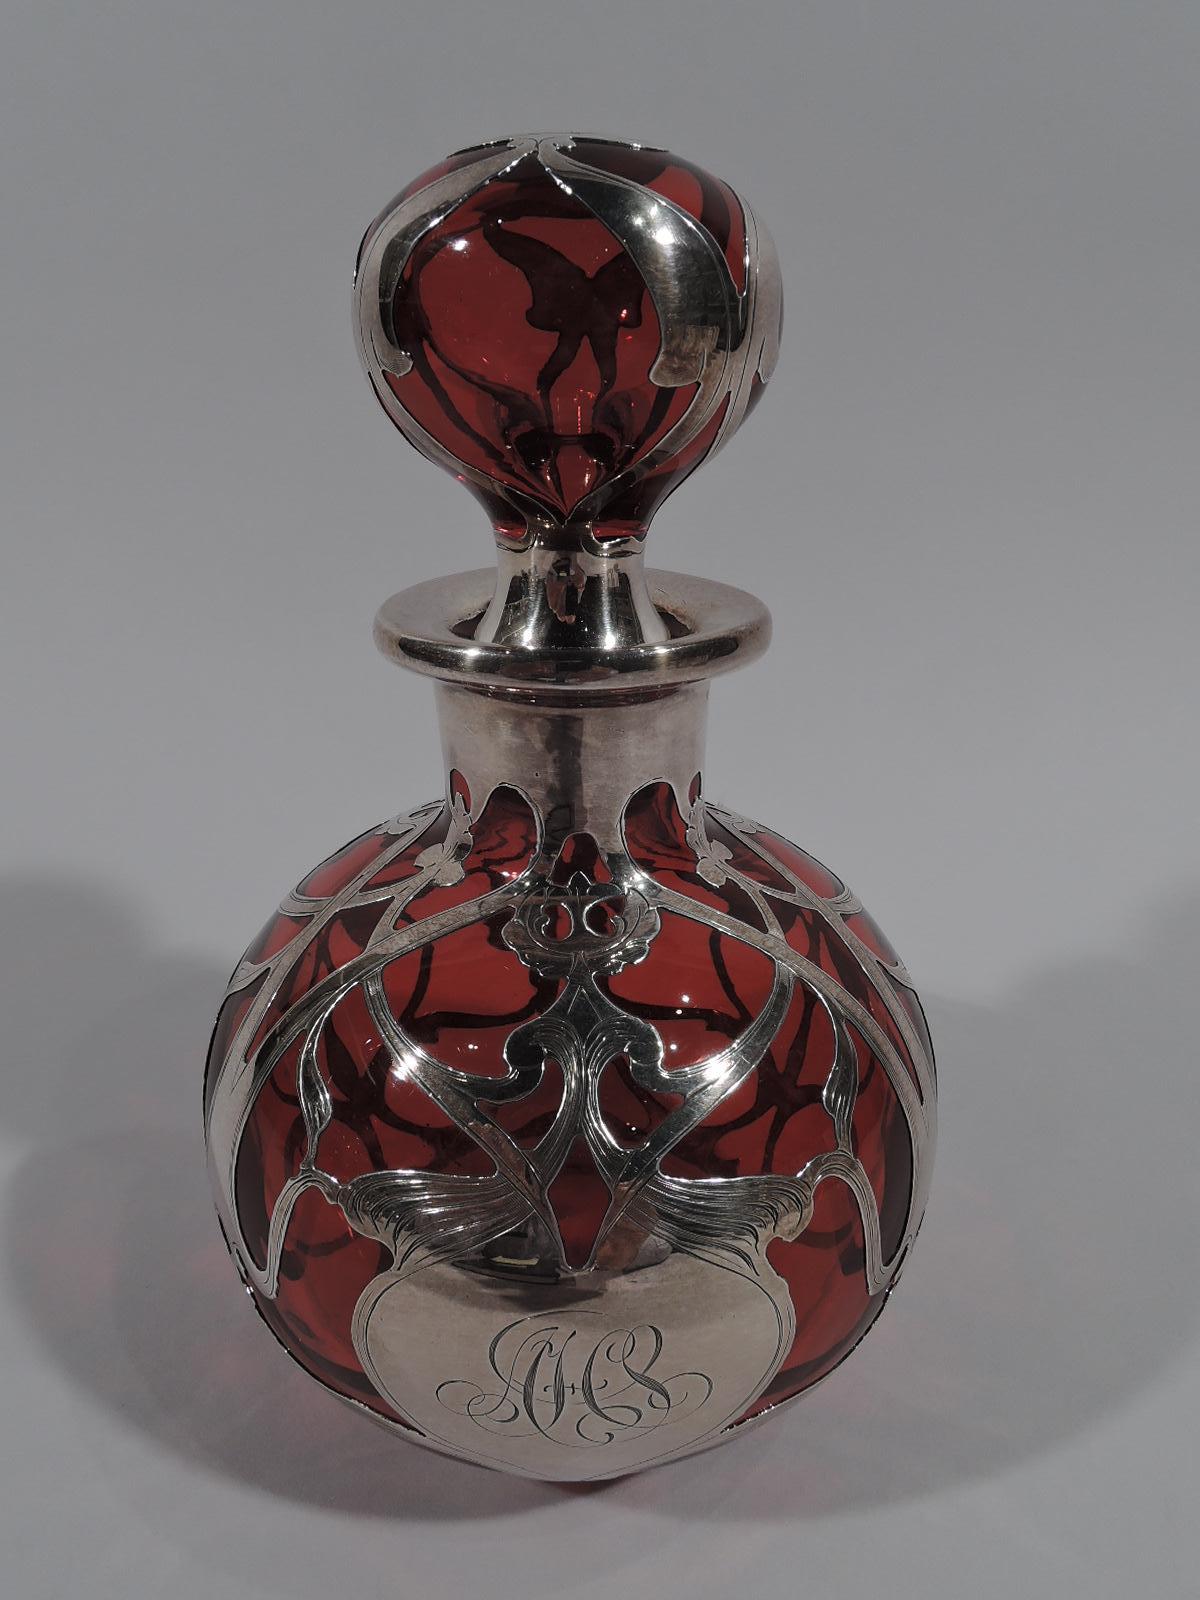 Large turn-of-the-century Art Nouveau glass perfume with engraved silver overlay. Made by Gorham in Providence. Globular with everted rim. Ball stopper with short plug. Loose and interlaced silver scrollwork with flower heads in open and symmetrical